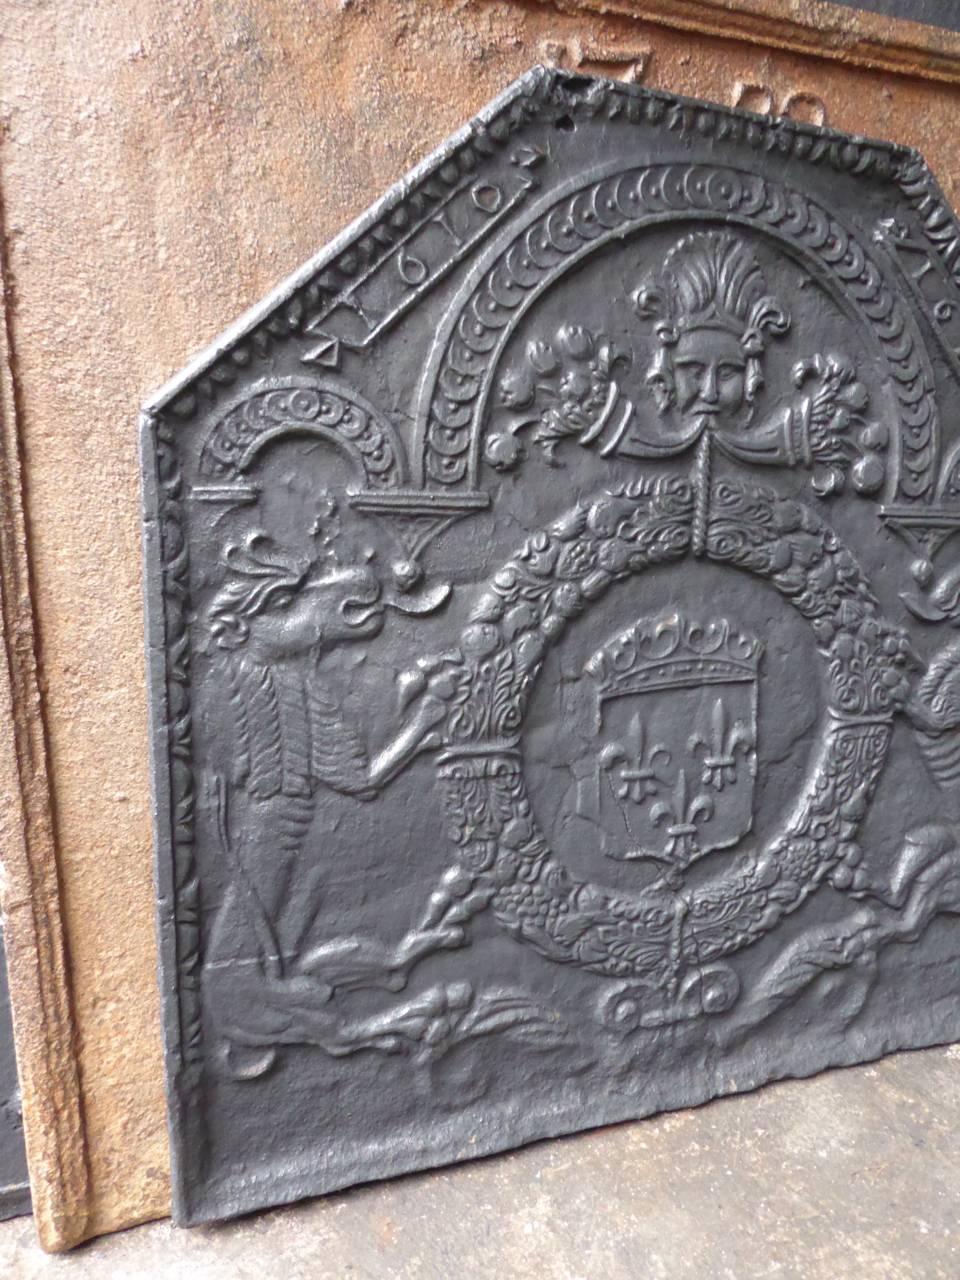 17th century fireback with the arms of France.

Coat of arms of the House of Bourbon, an originally French royal house that became a major dynasty in Europe. It delivered kings for Spain (Navarra), France, both Sicilies and Parma. Bourbon kings